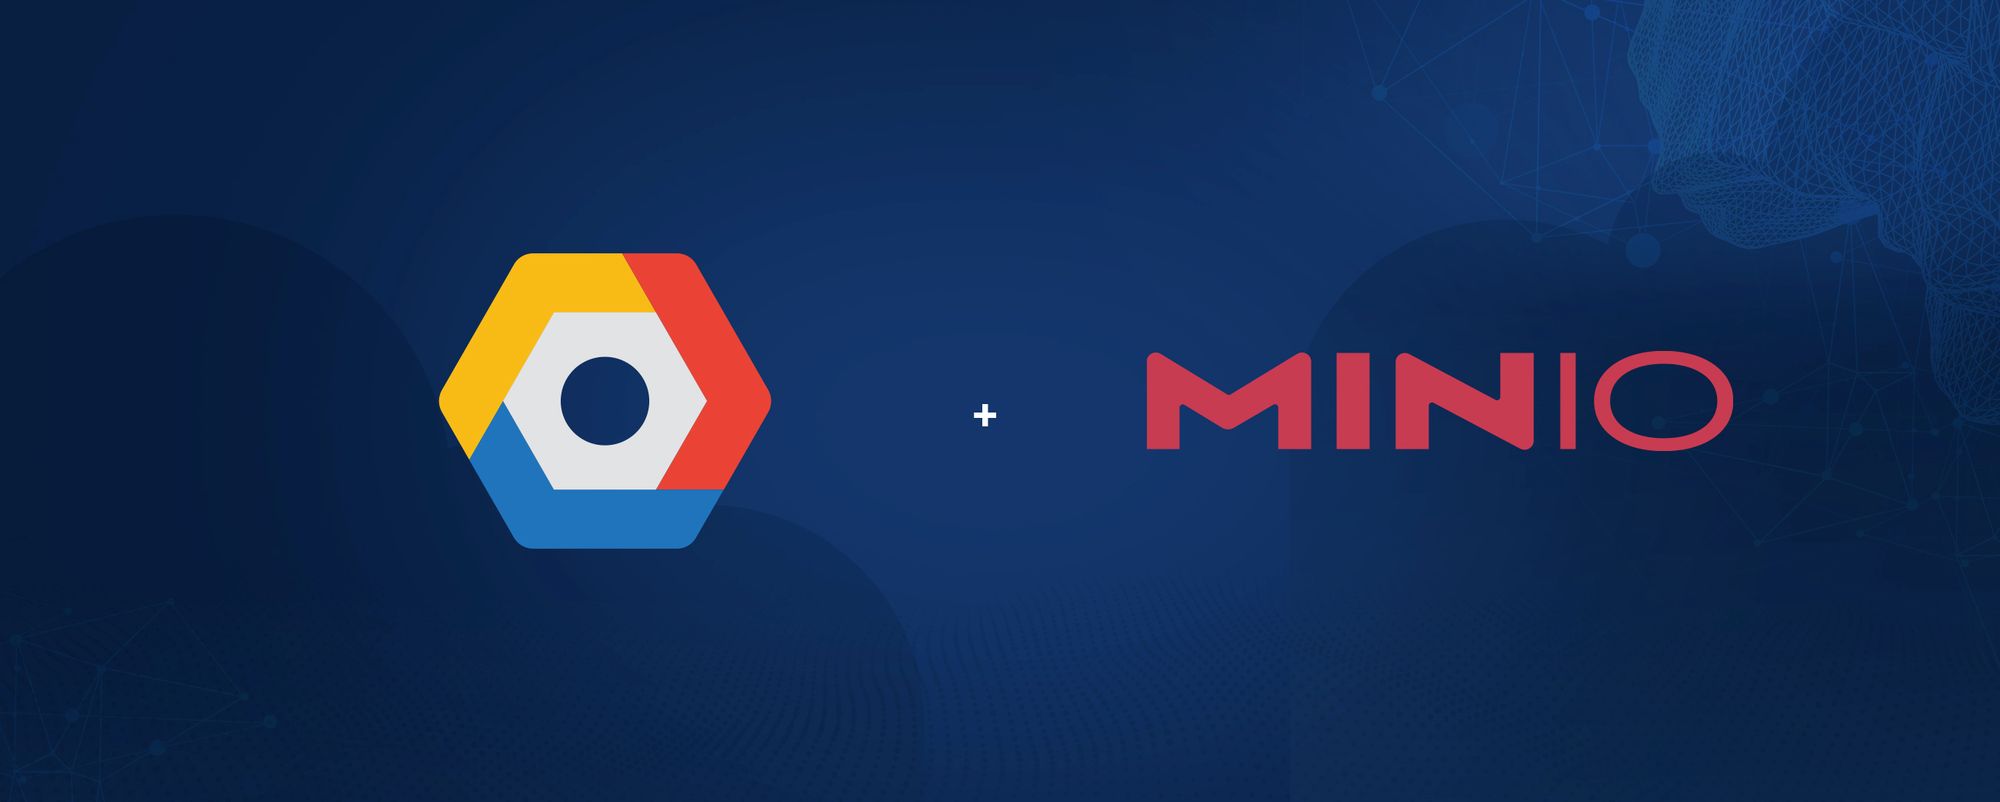 MinIO Multi Cloud Object Storage Available on GCP Marketplace